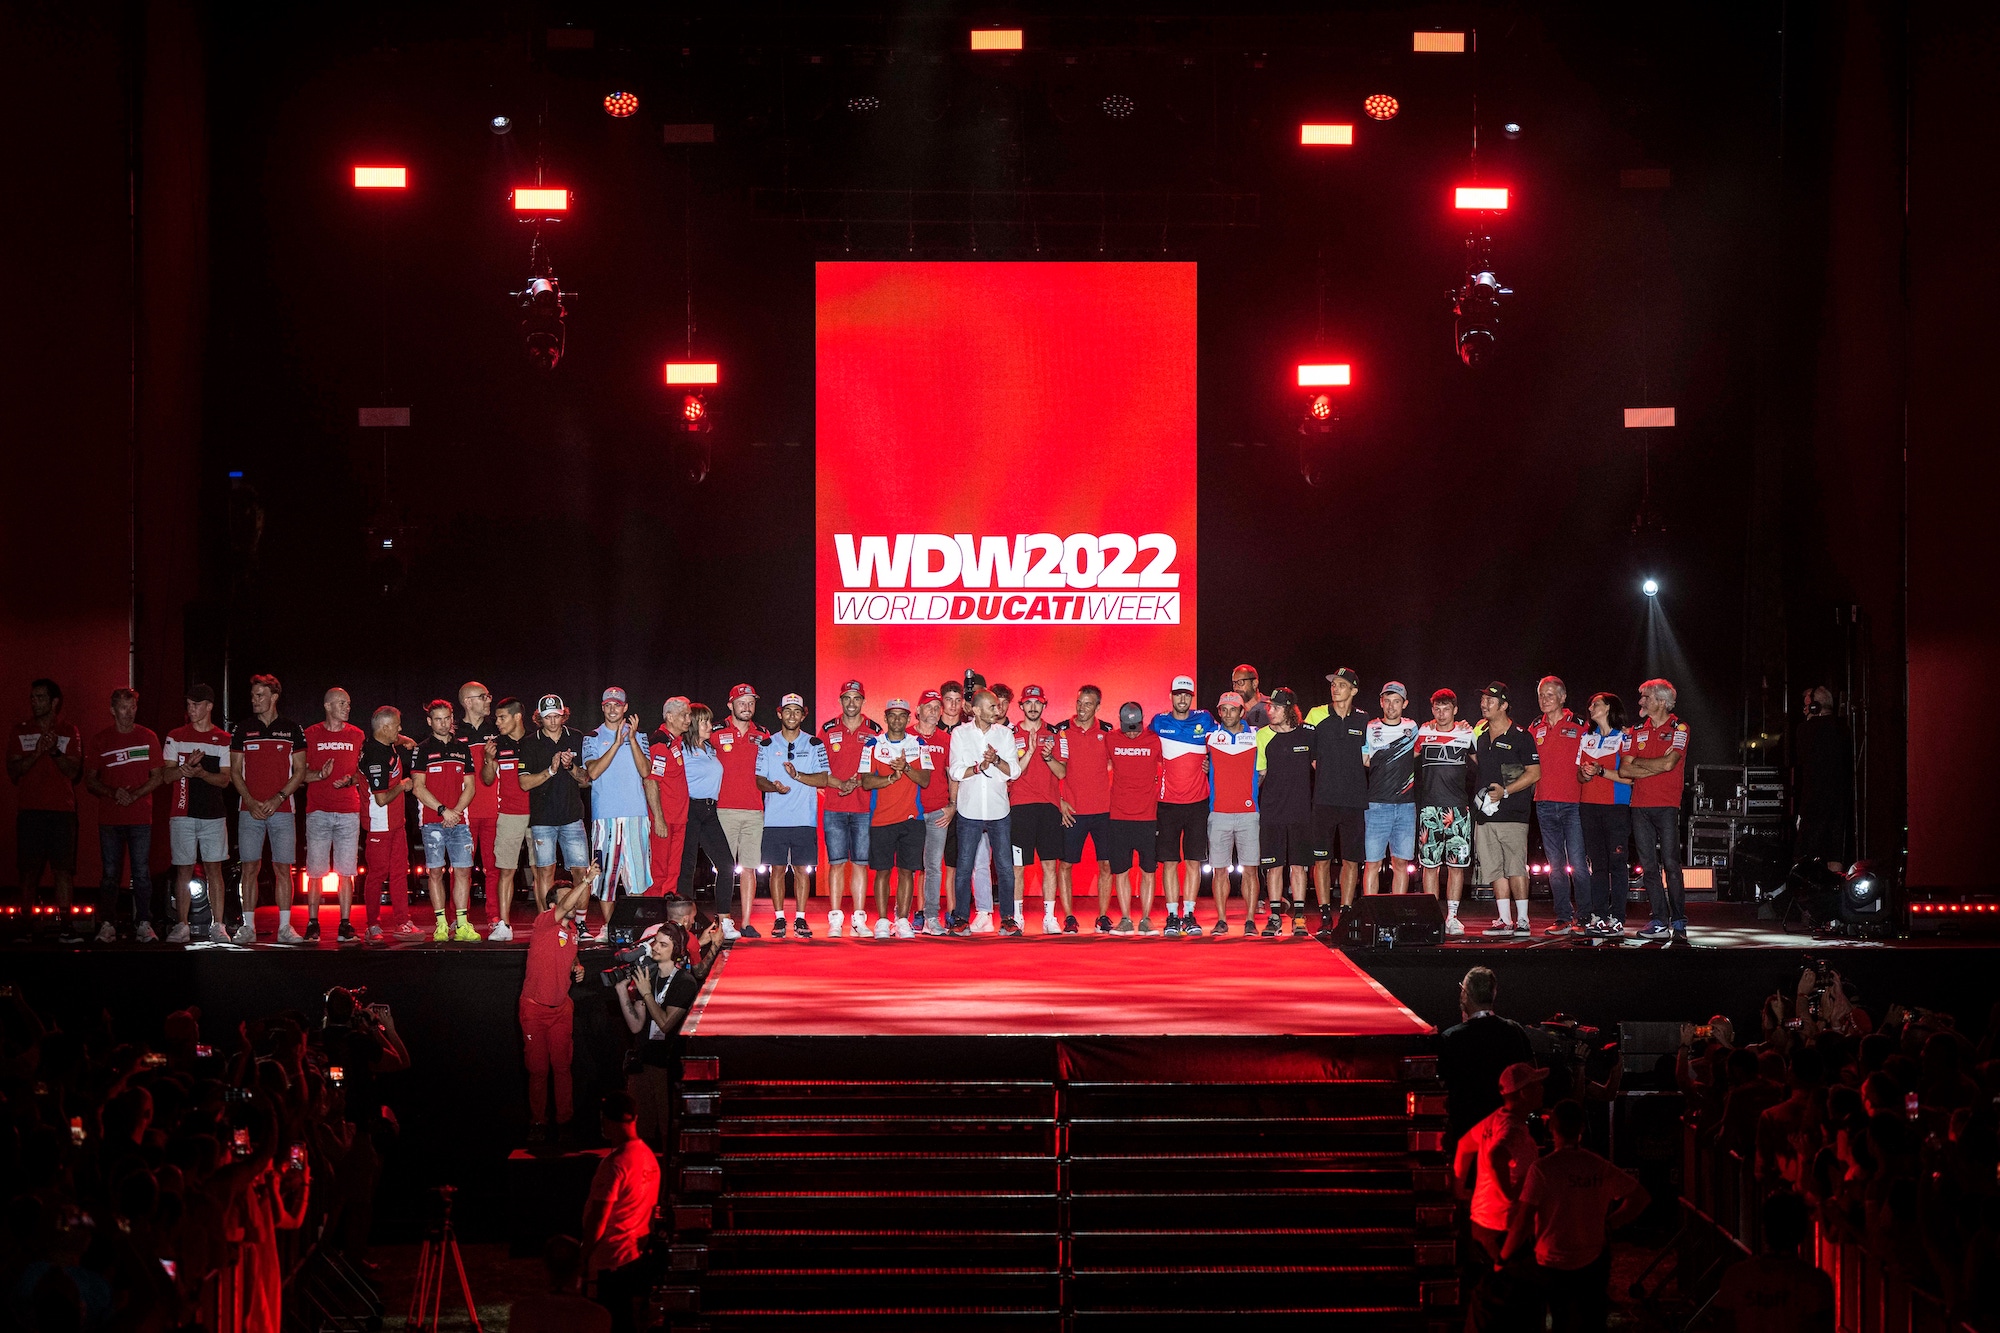 WDW2022: This year's iteration of the World Ducati Week.